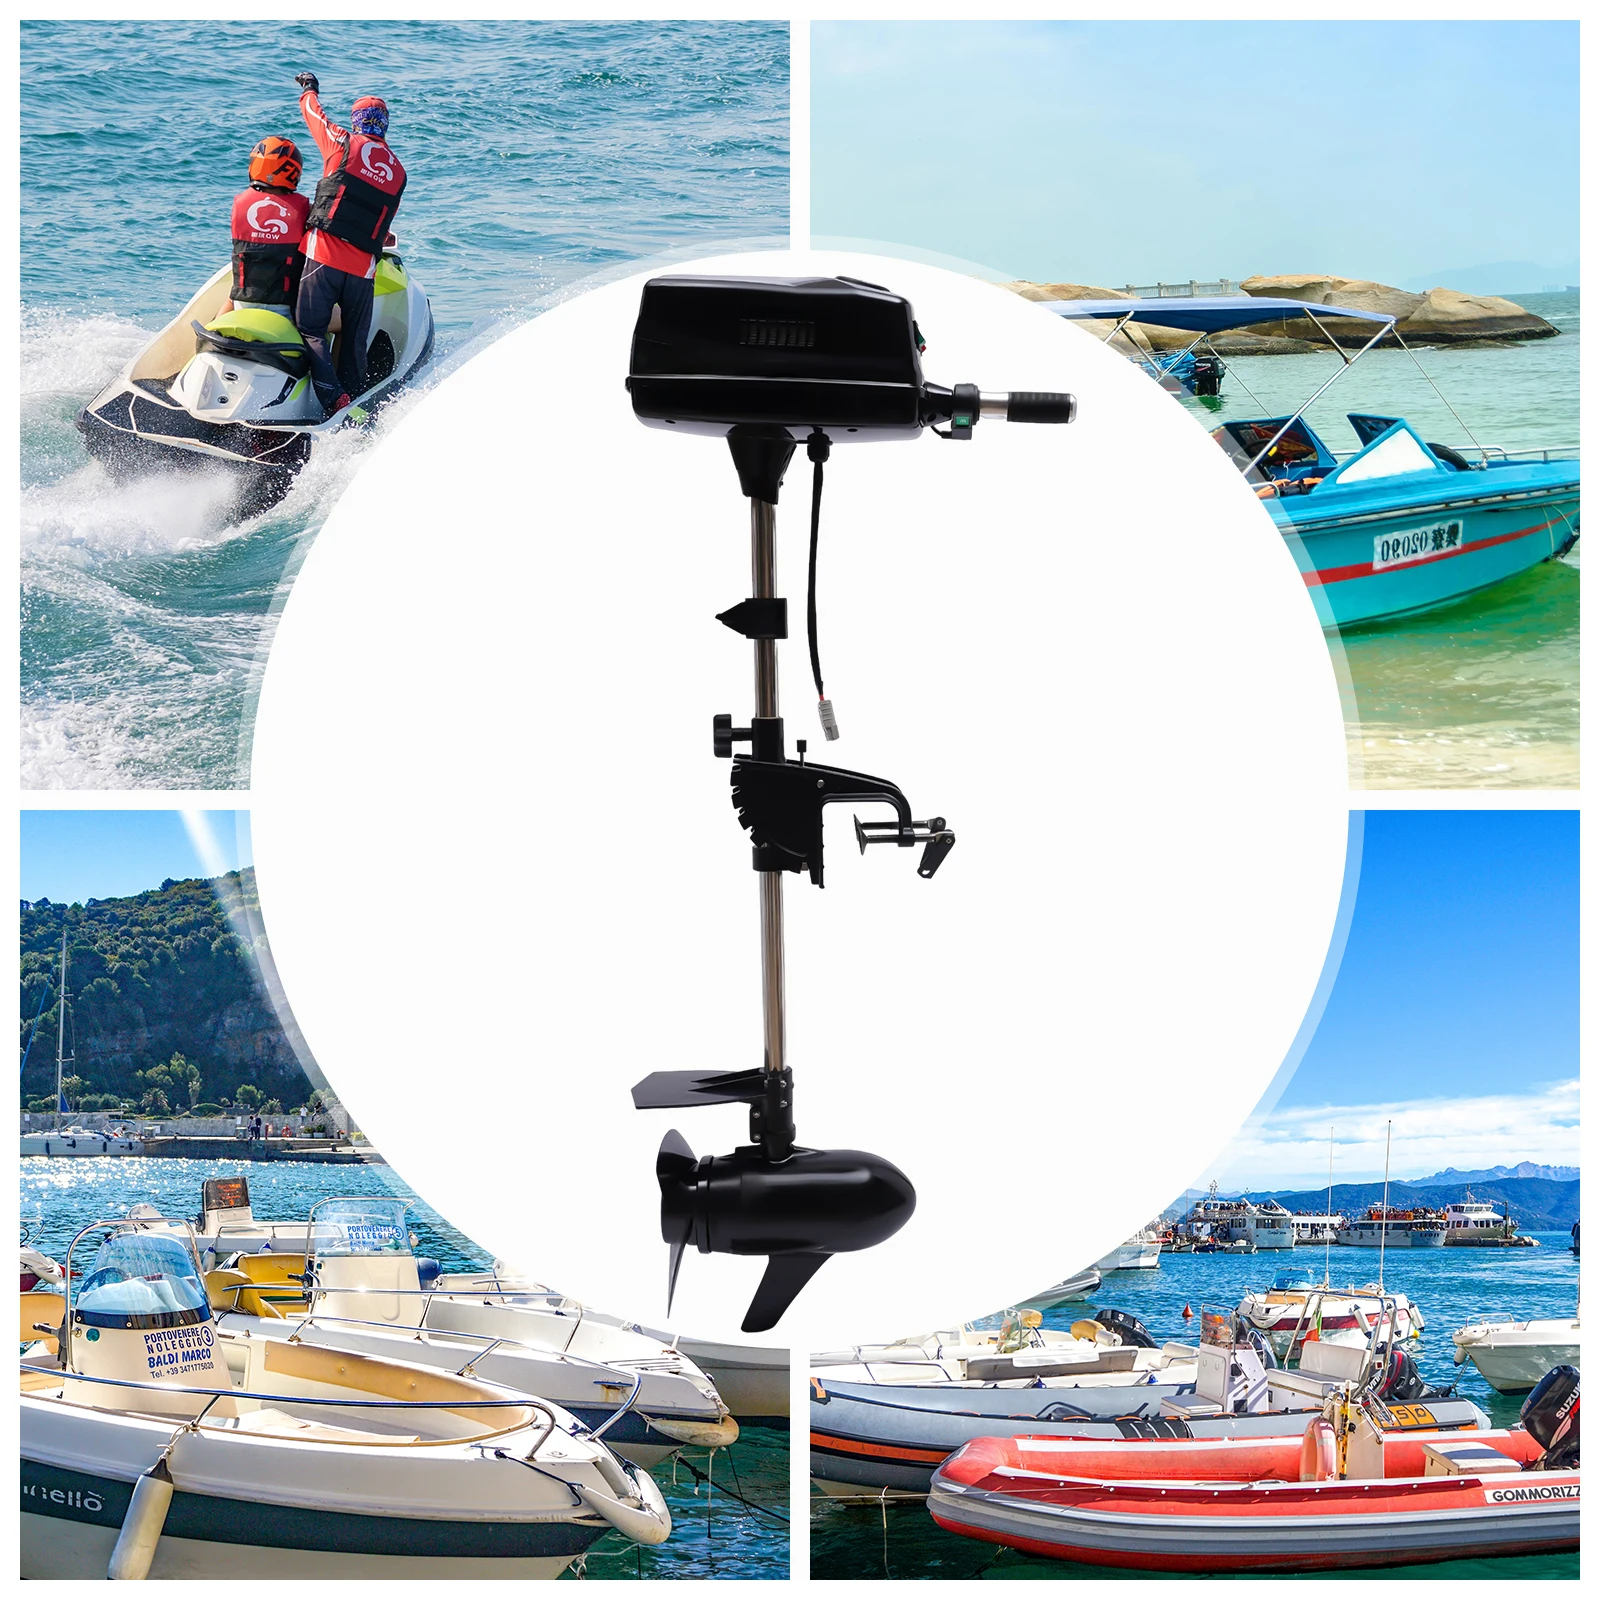 

Hangkai 48V Electric Outboard Engine 8Hp 2200W Brushless Motor Is Suitable For Inflatable Boat And Canoe